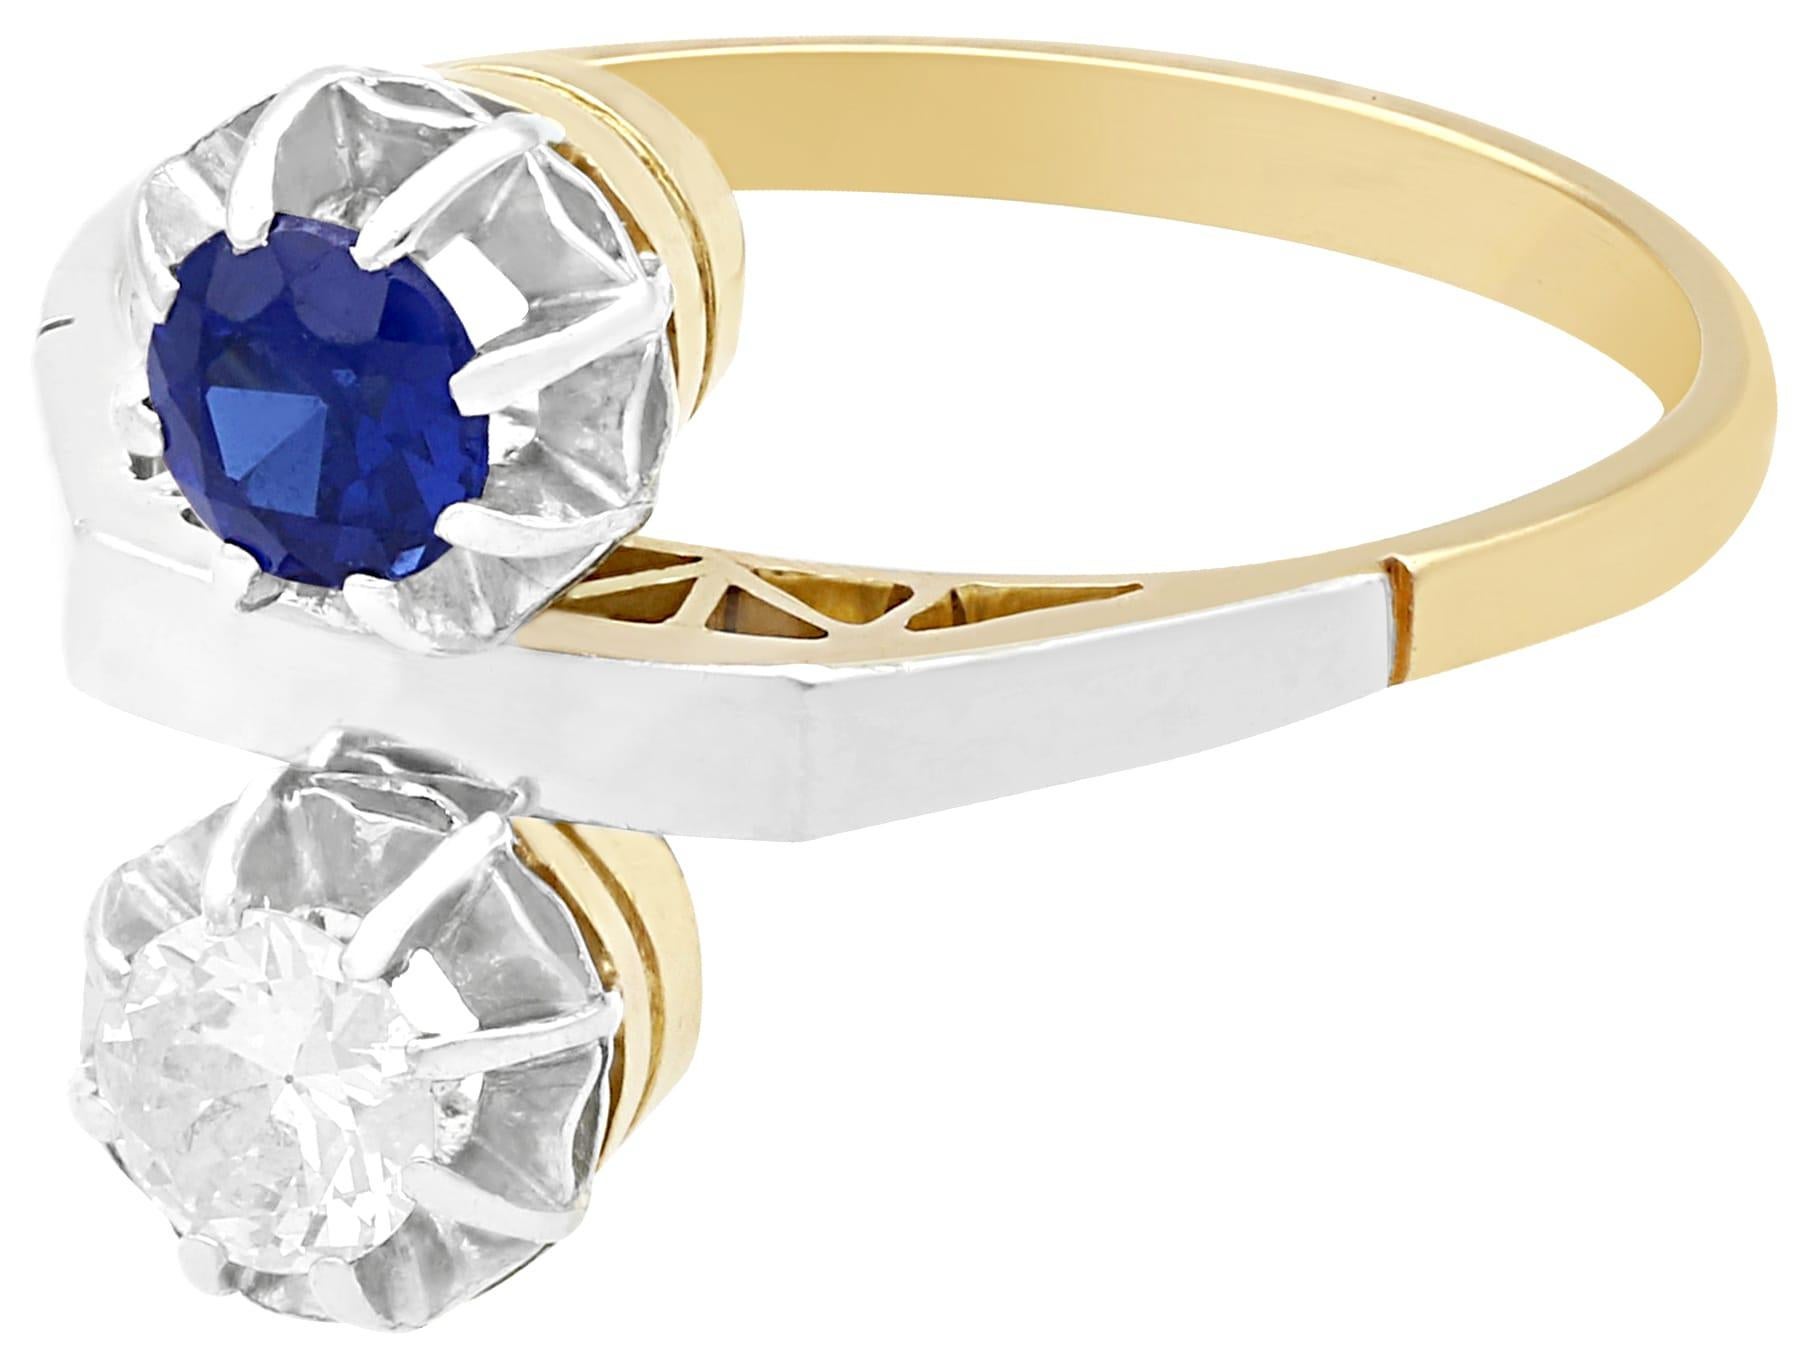 A fine and impressive vintage 0.33 carat natural blue sapphire and 0.28 carat diamond, 18 karat yellow gold and platinum set cocktail ring; part of our vintage jewelry and estate jewelry collections.

This fine and impressive vintage sapphire and